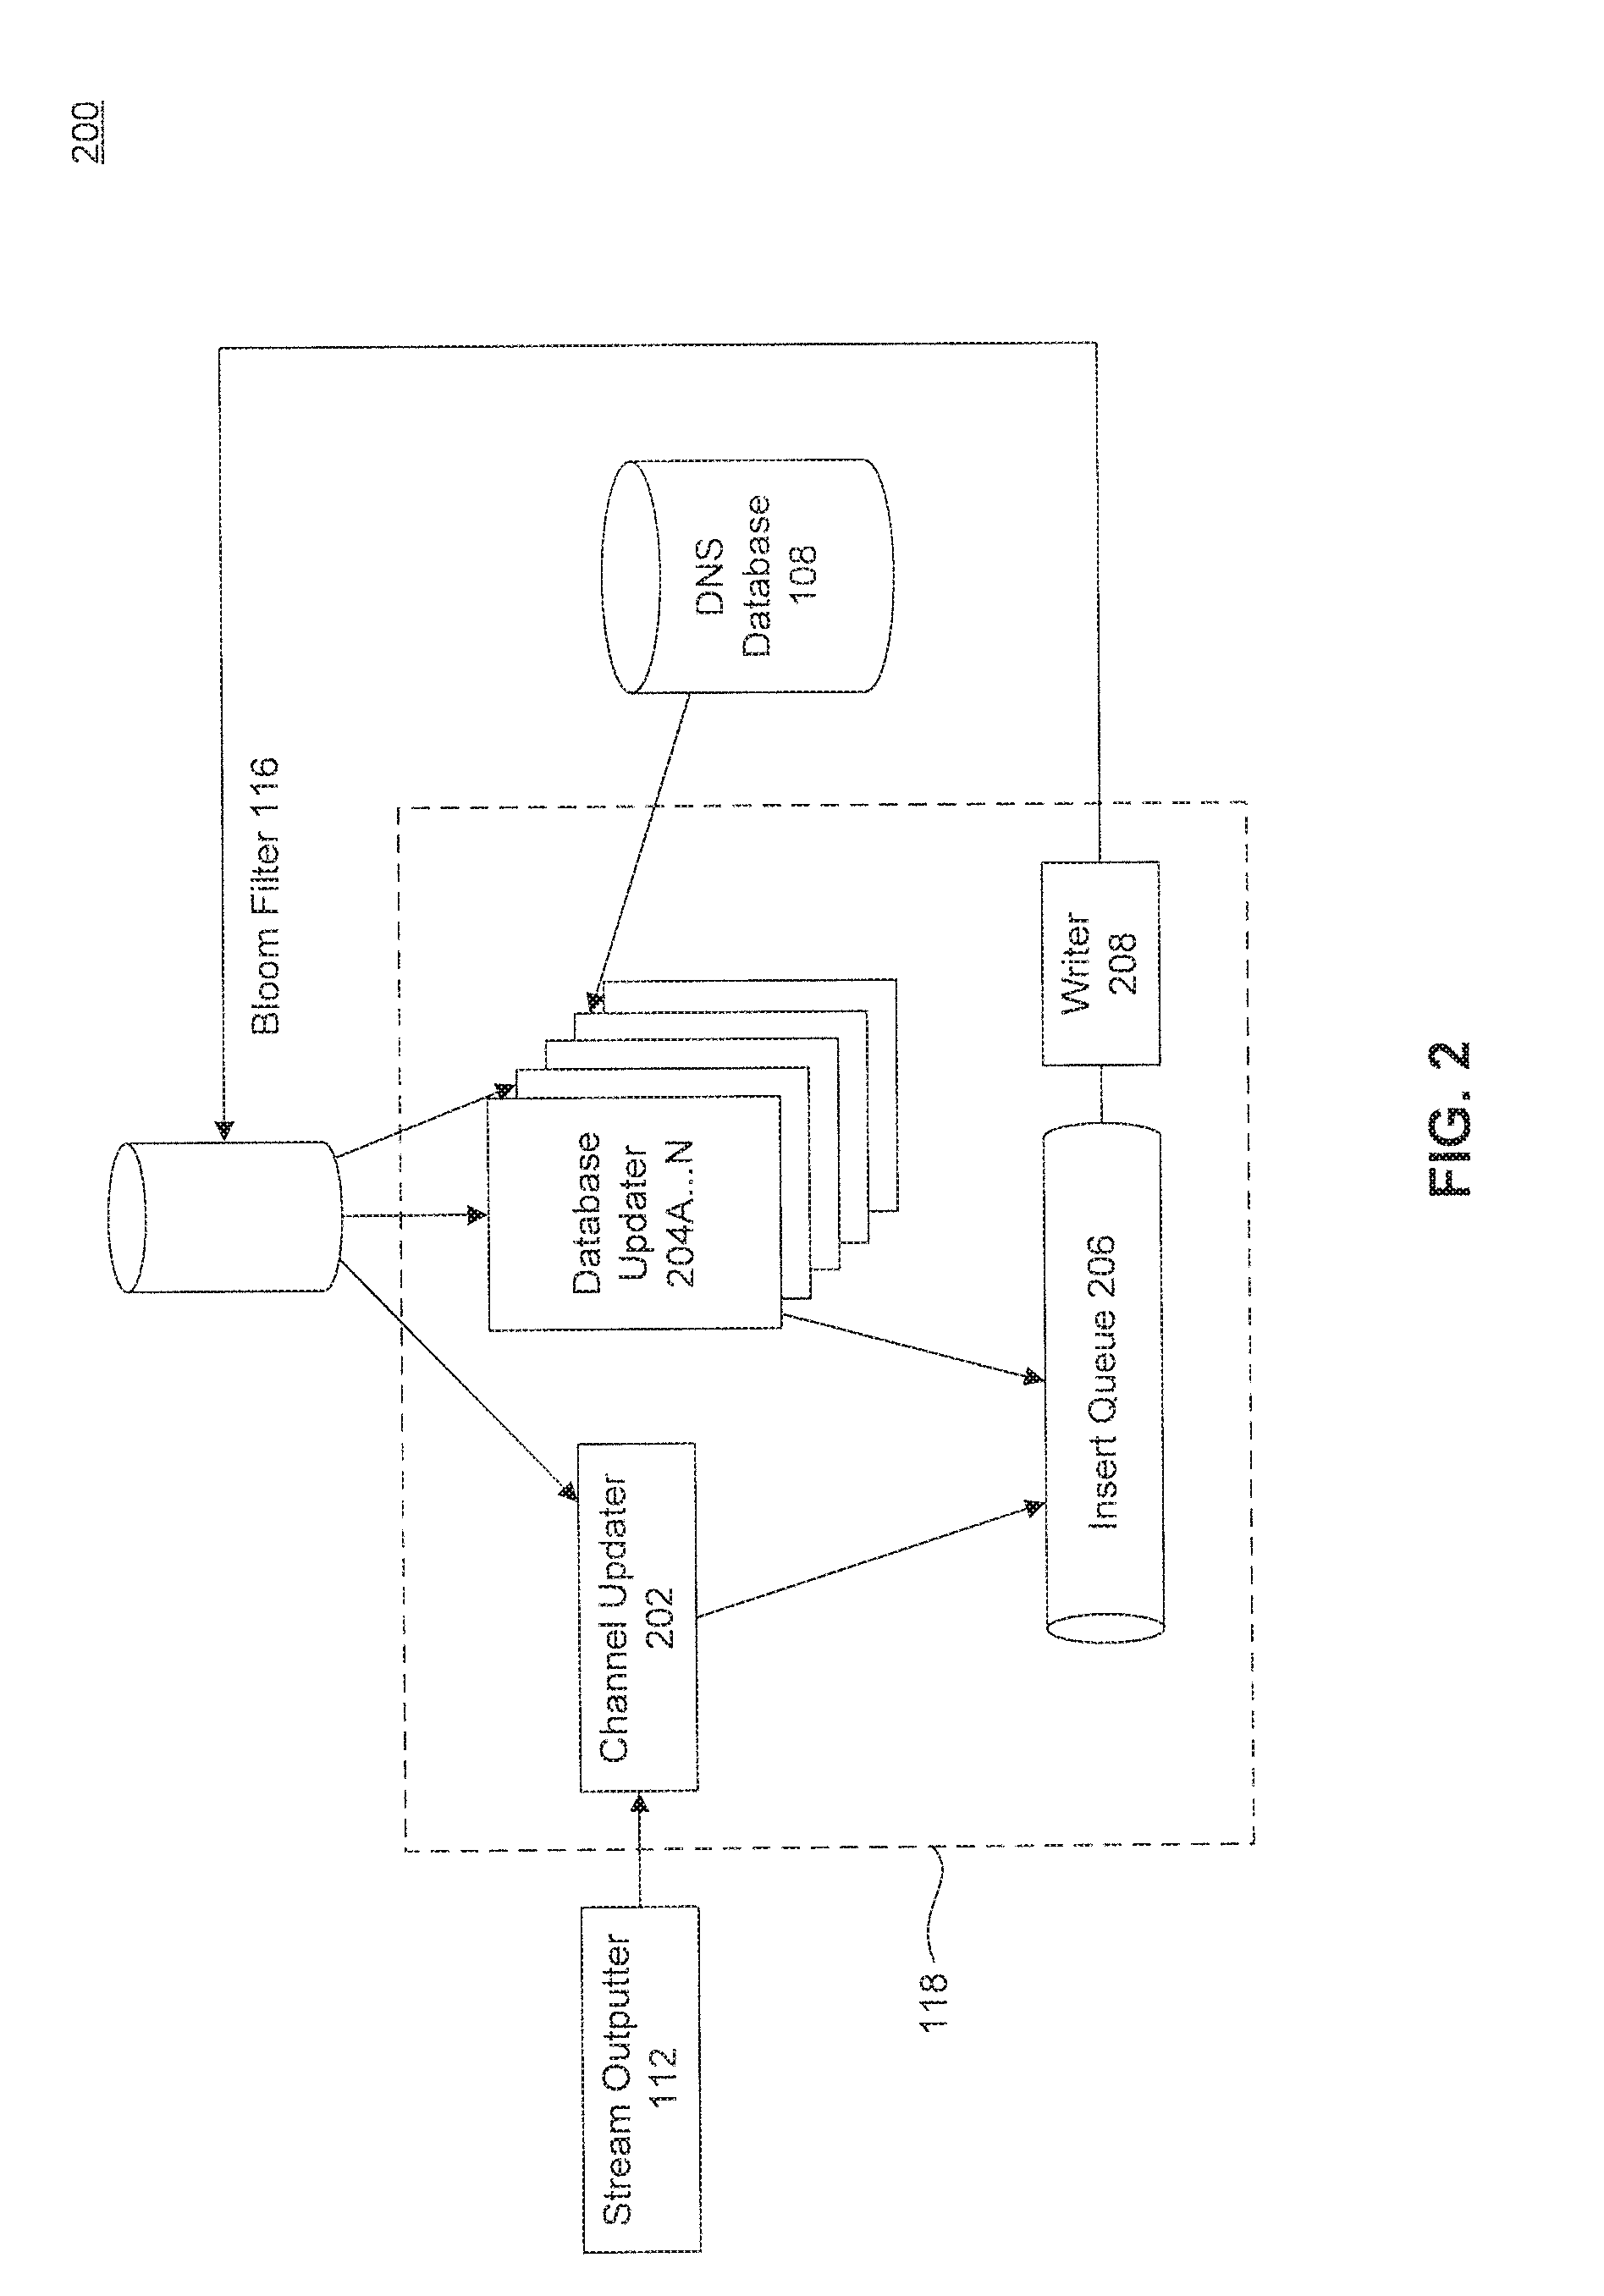 Parallel detection of updates to a domain name system record system using a  common filter